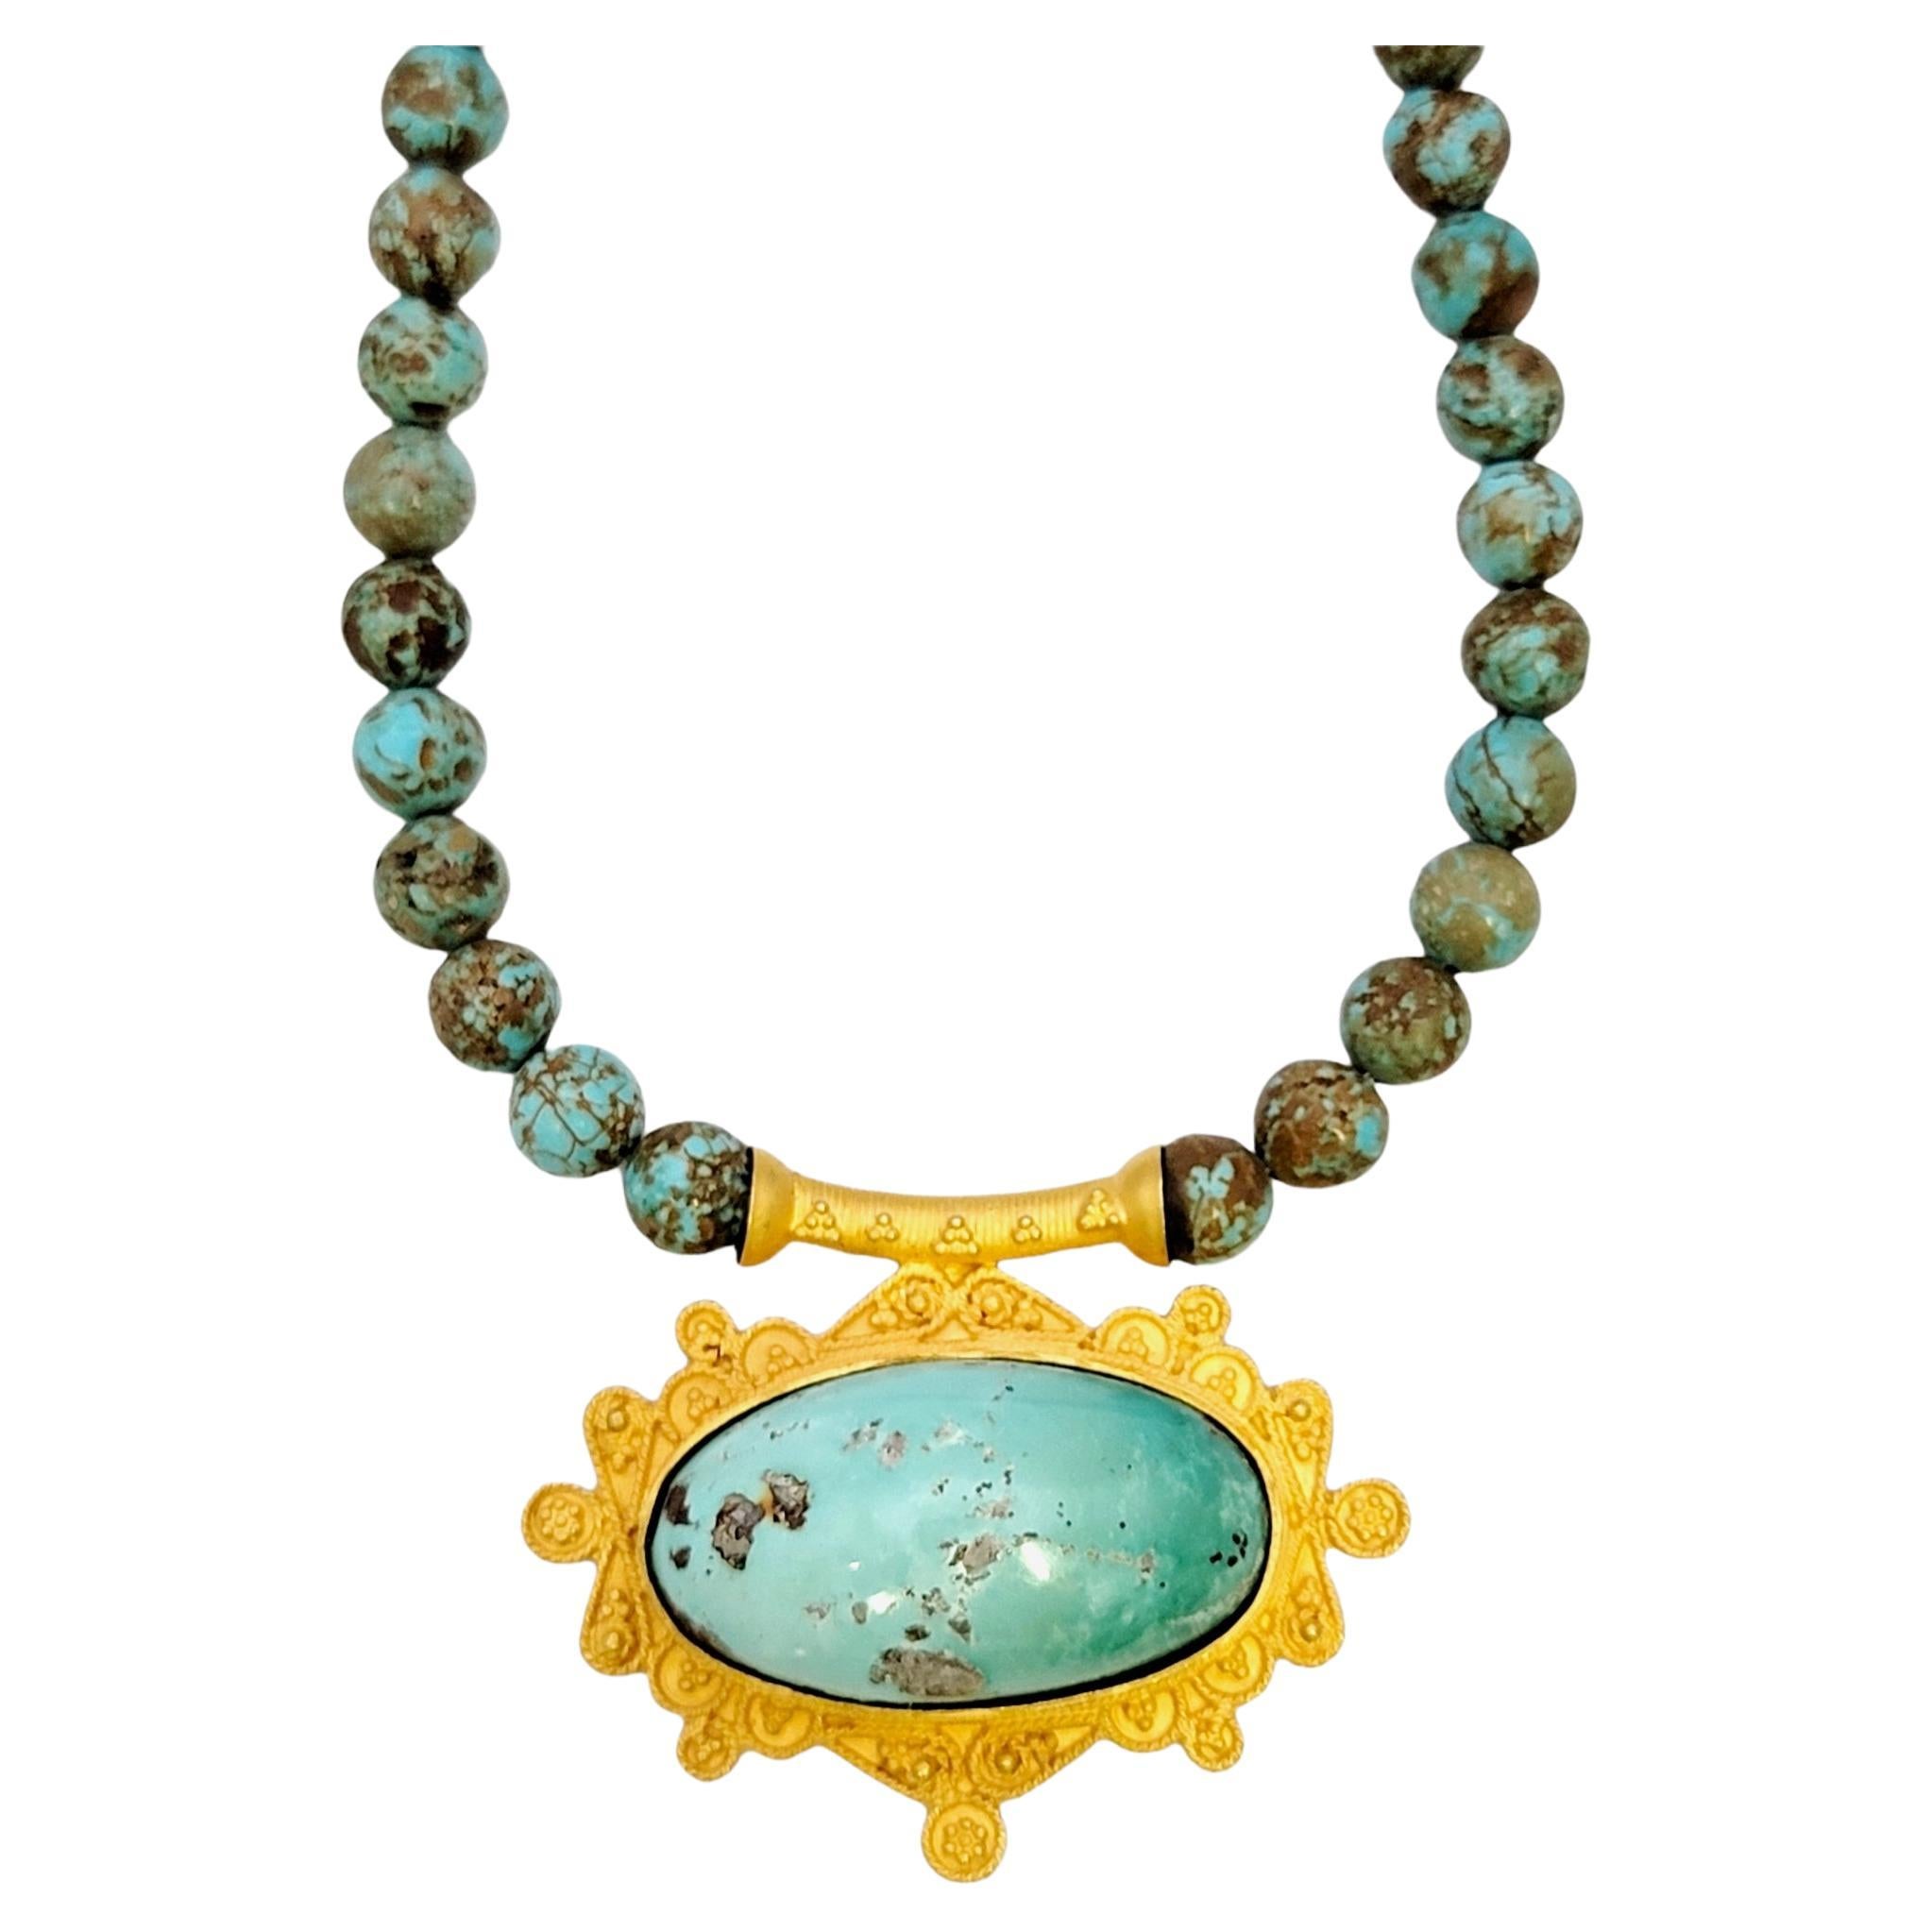 Natural Turquoise Beaded Necklace with Ornate 18 Karat Yellow Gold Pendant For Sale